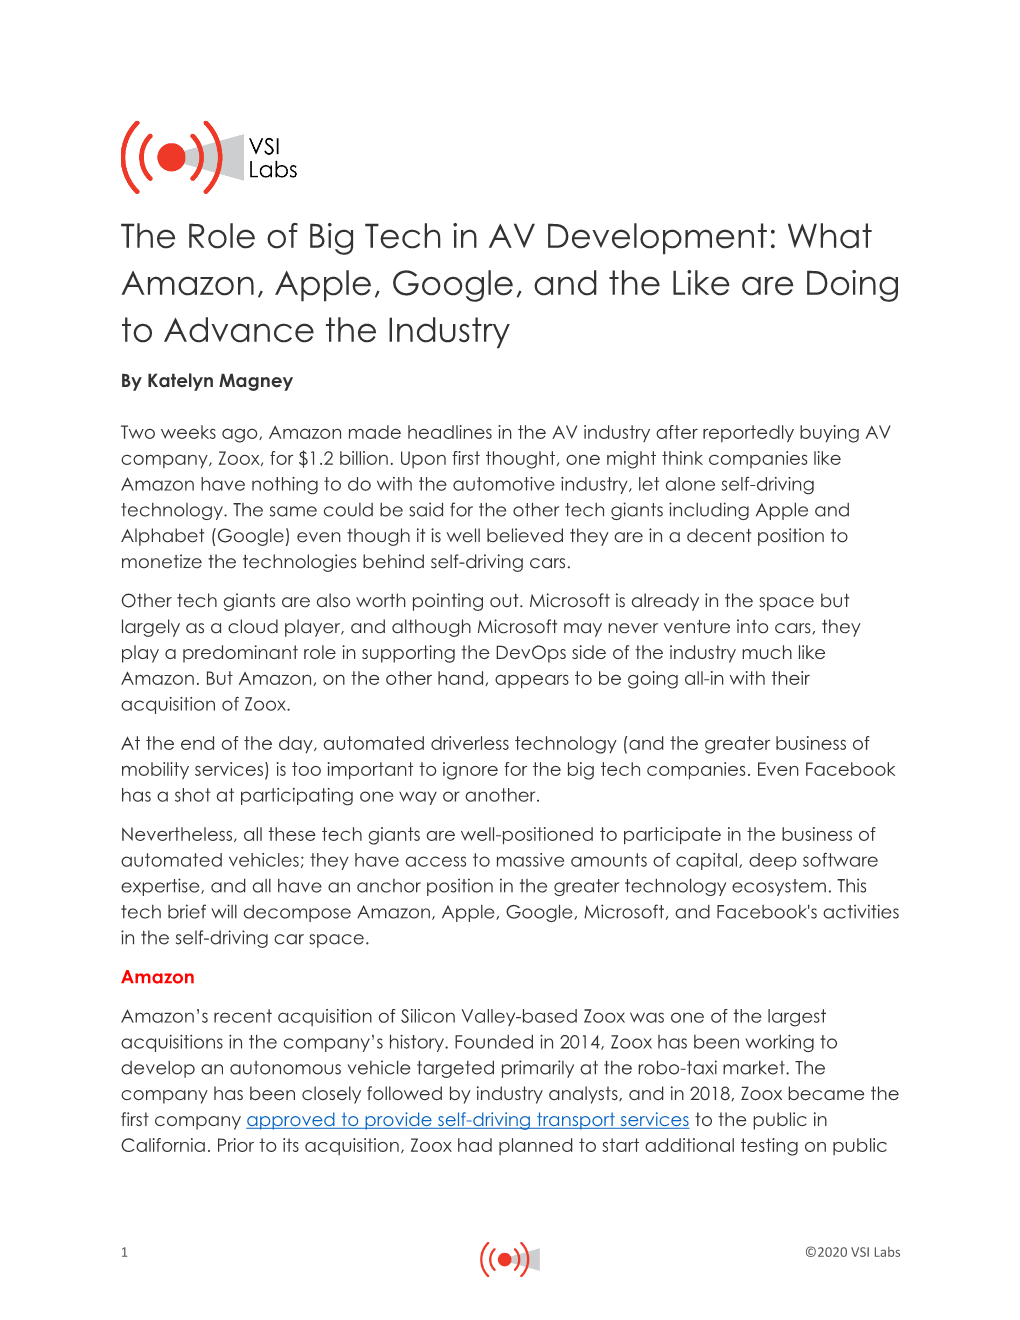 The Role of Big Tech in AV Development: What Amazon, Apple, Google, and the Like Are Doing to Advance the Industry